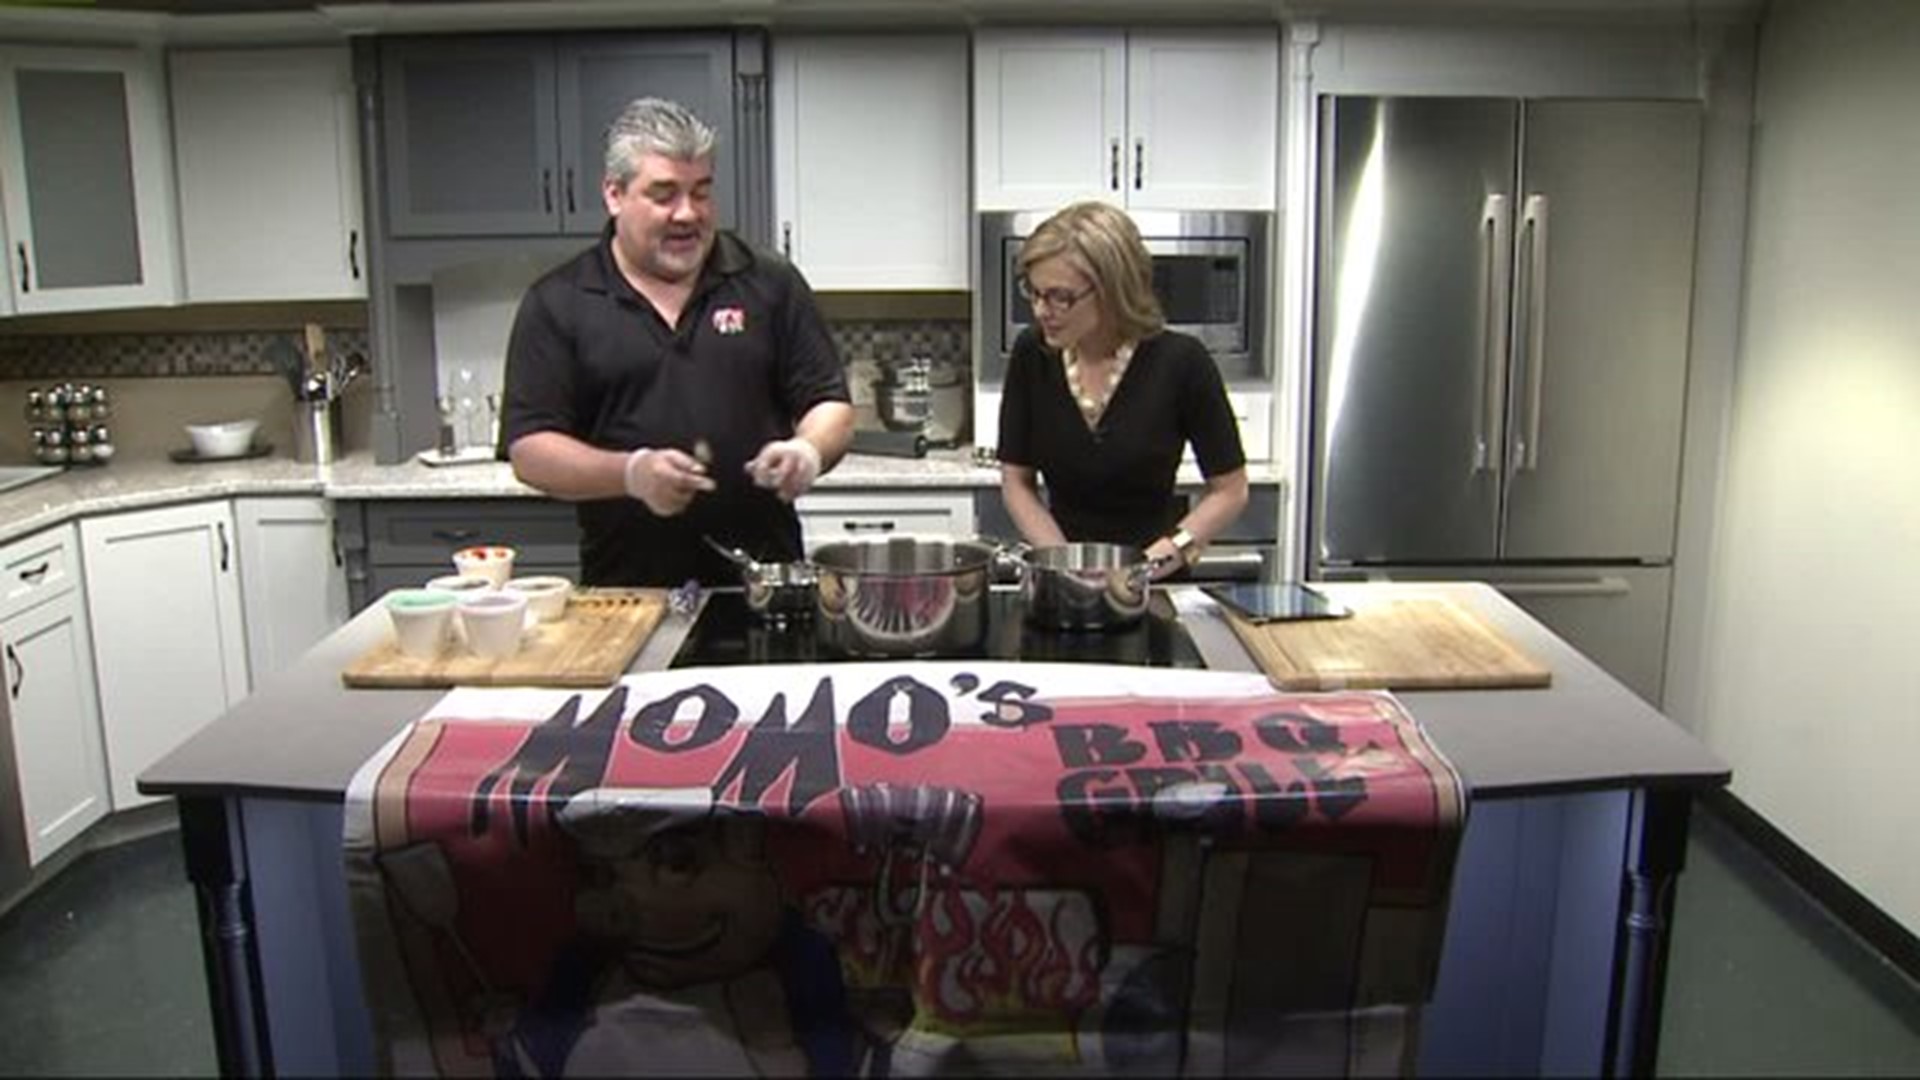 MoMo`s BBQ & Grill brings sweet and spicy to the FOX43 Kitchen